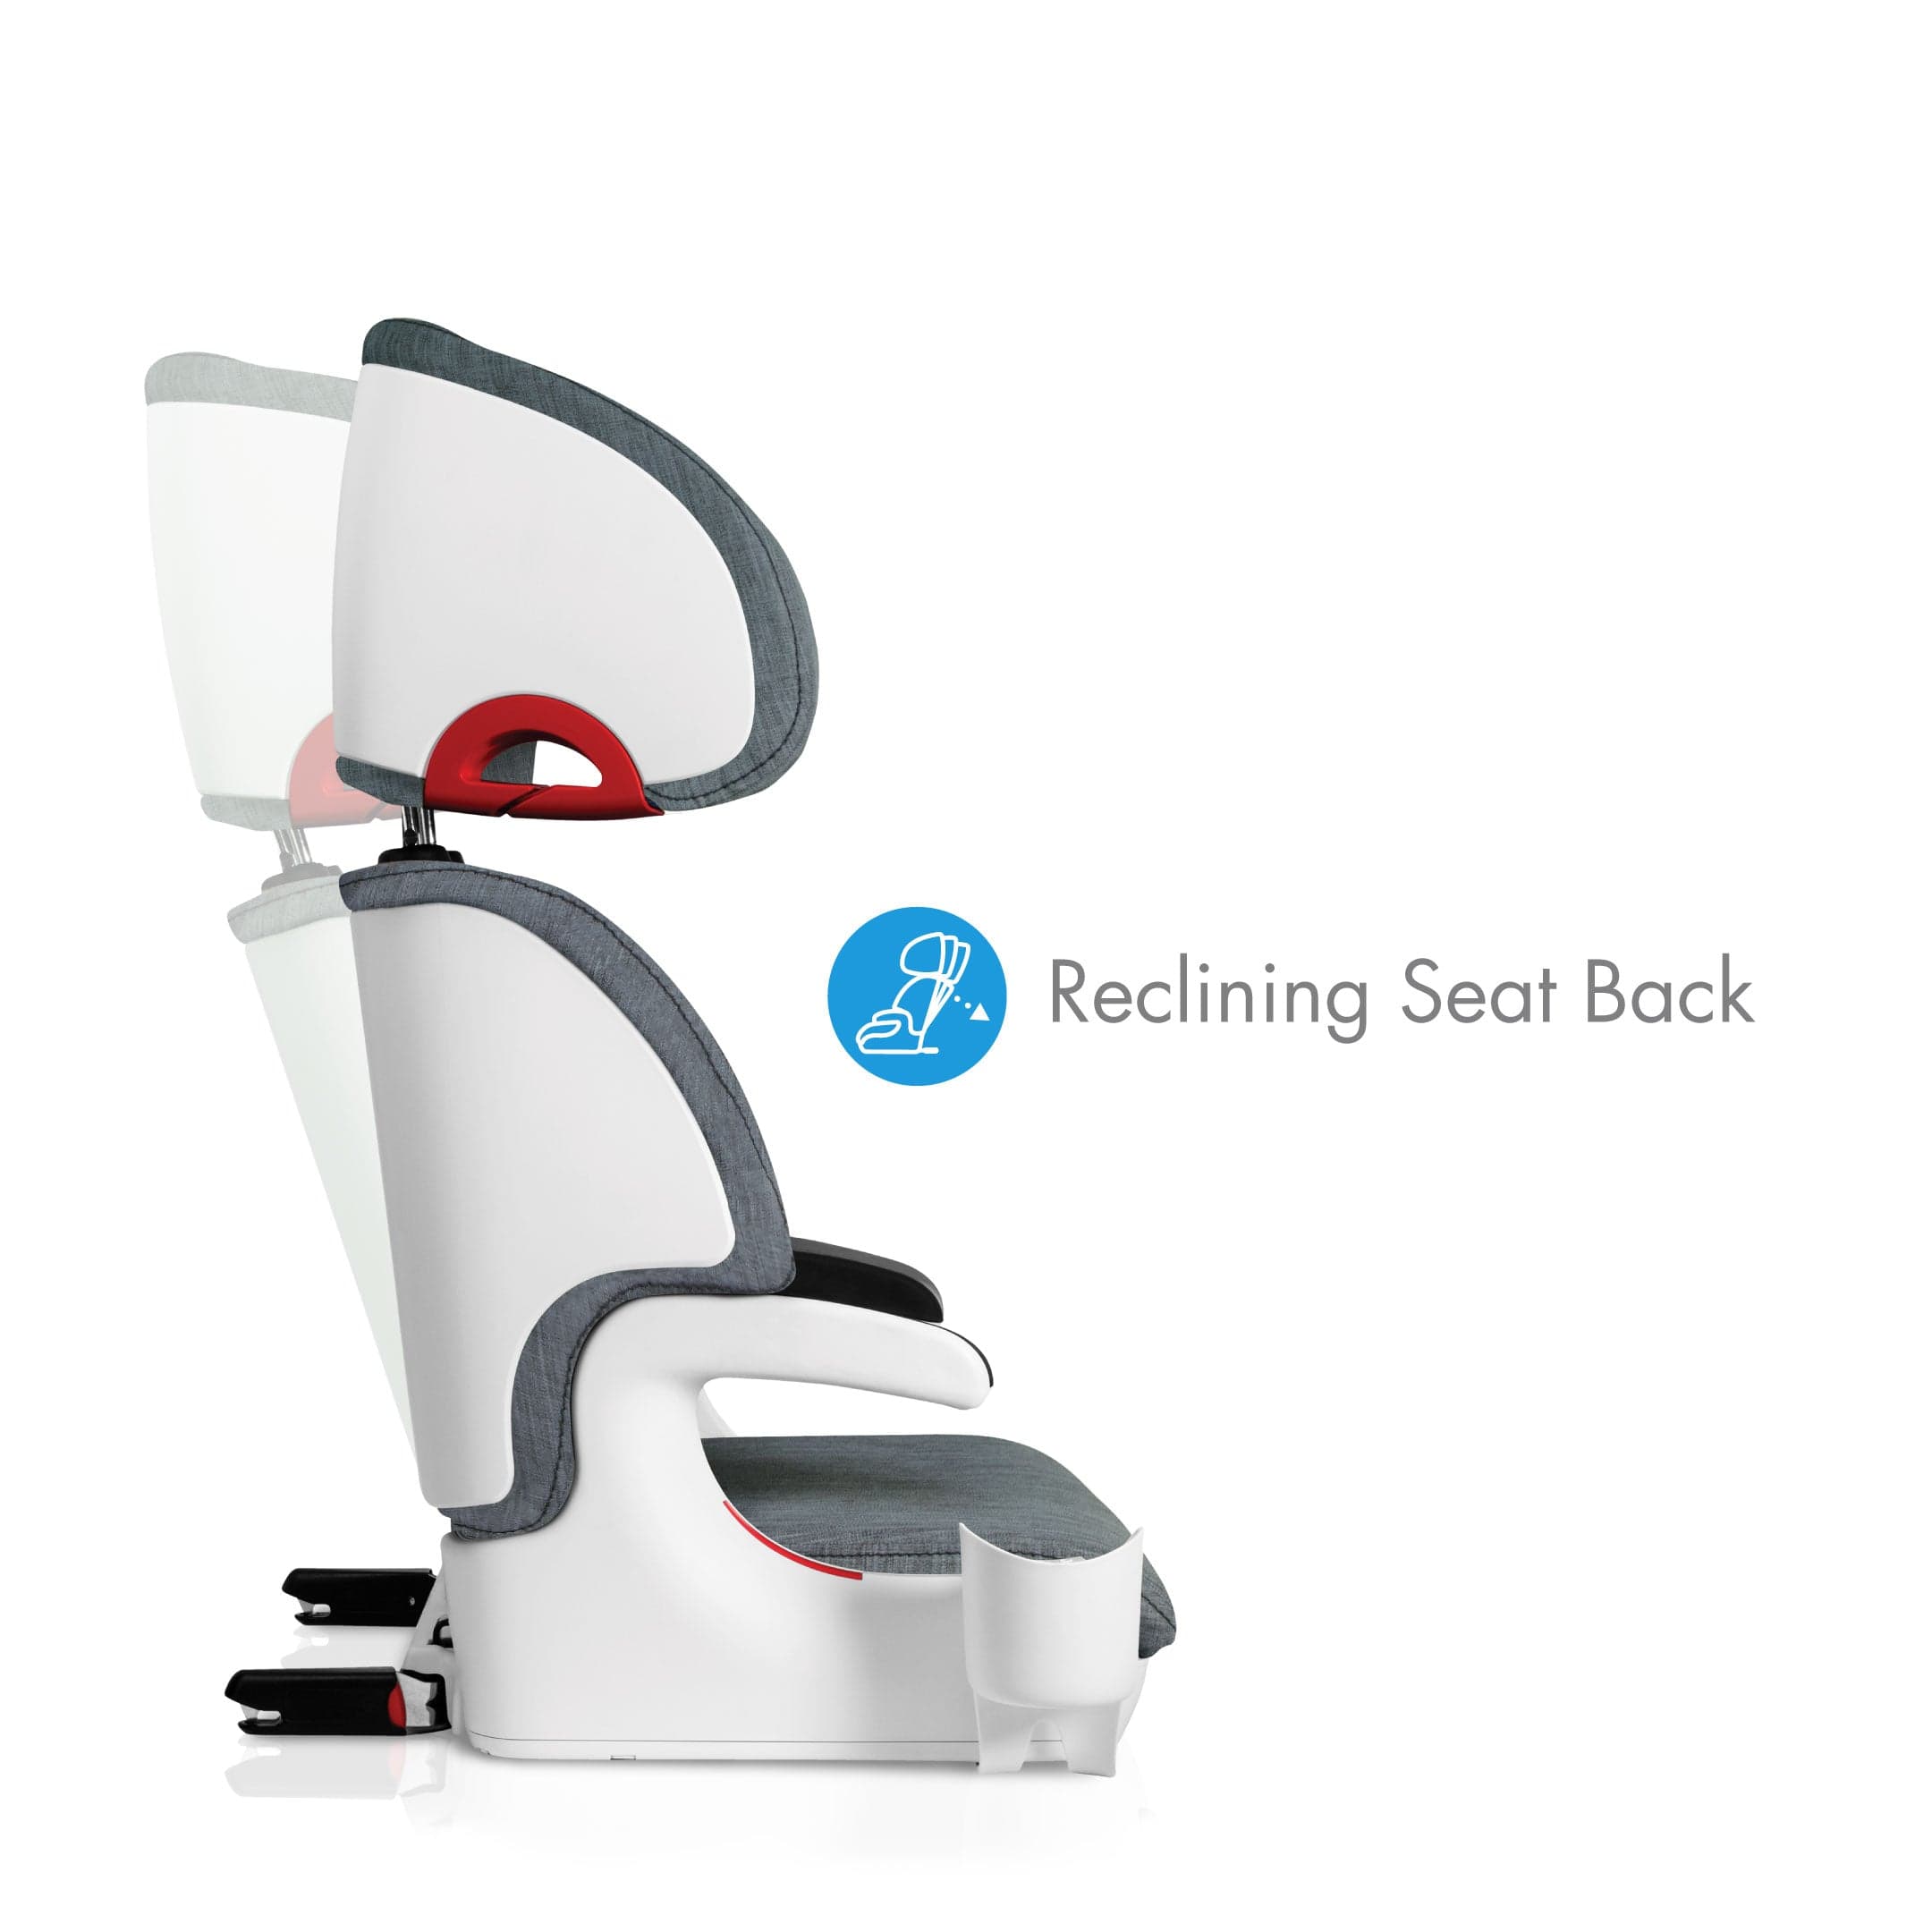 Clek Booster Seat oobr all-groups